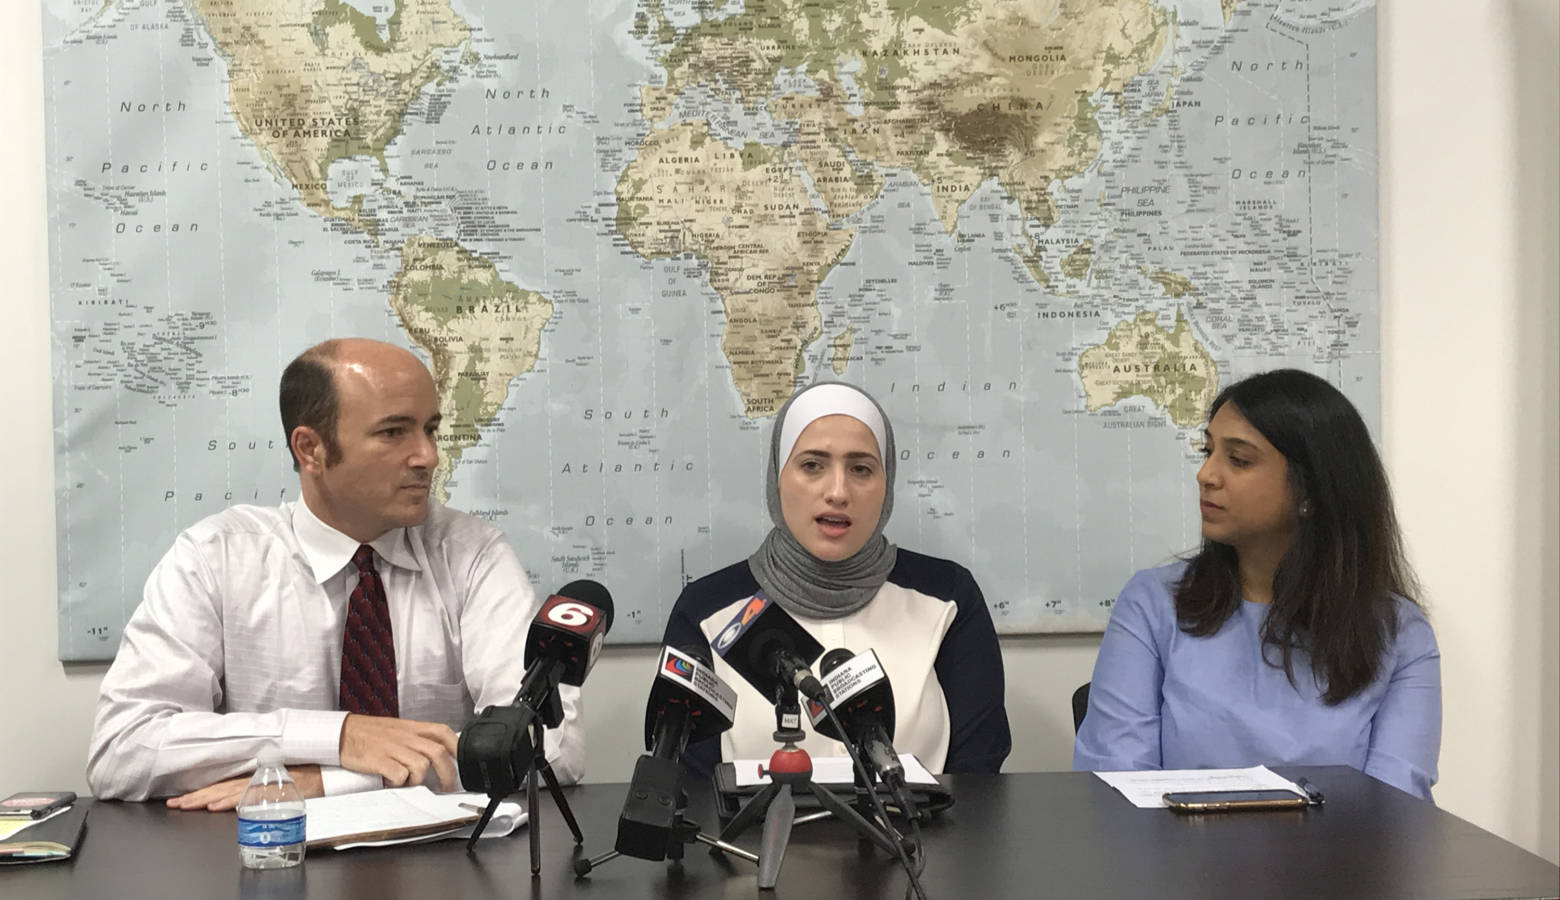 From left, ACLU of Indiana's Gavin Rose, Exodus Refugee Immigration's Sara Hindi, and Muslim Alliance of Indiana's Aliya Amin discuss the Supreme Court's decision on Pres. Trump's Muslim travel ban. (Brandon Smith/IPB News)